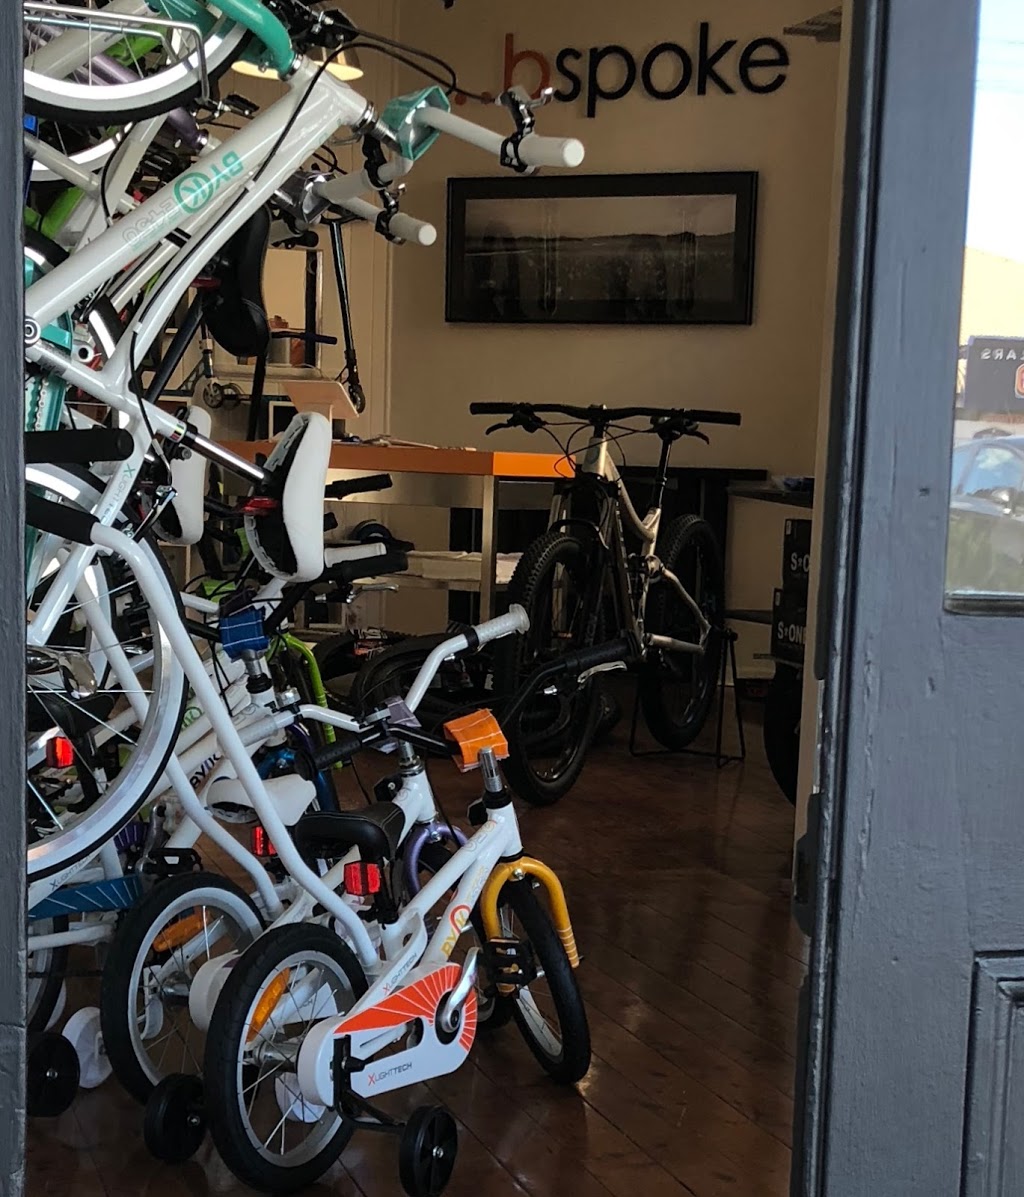 Bspoke Bicycles | bicycle store | shop 1/12-14 Gibraltar St, Bungendore NSW 2621, Australia | 0447277651 OR +61 447 277 651